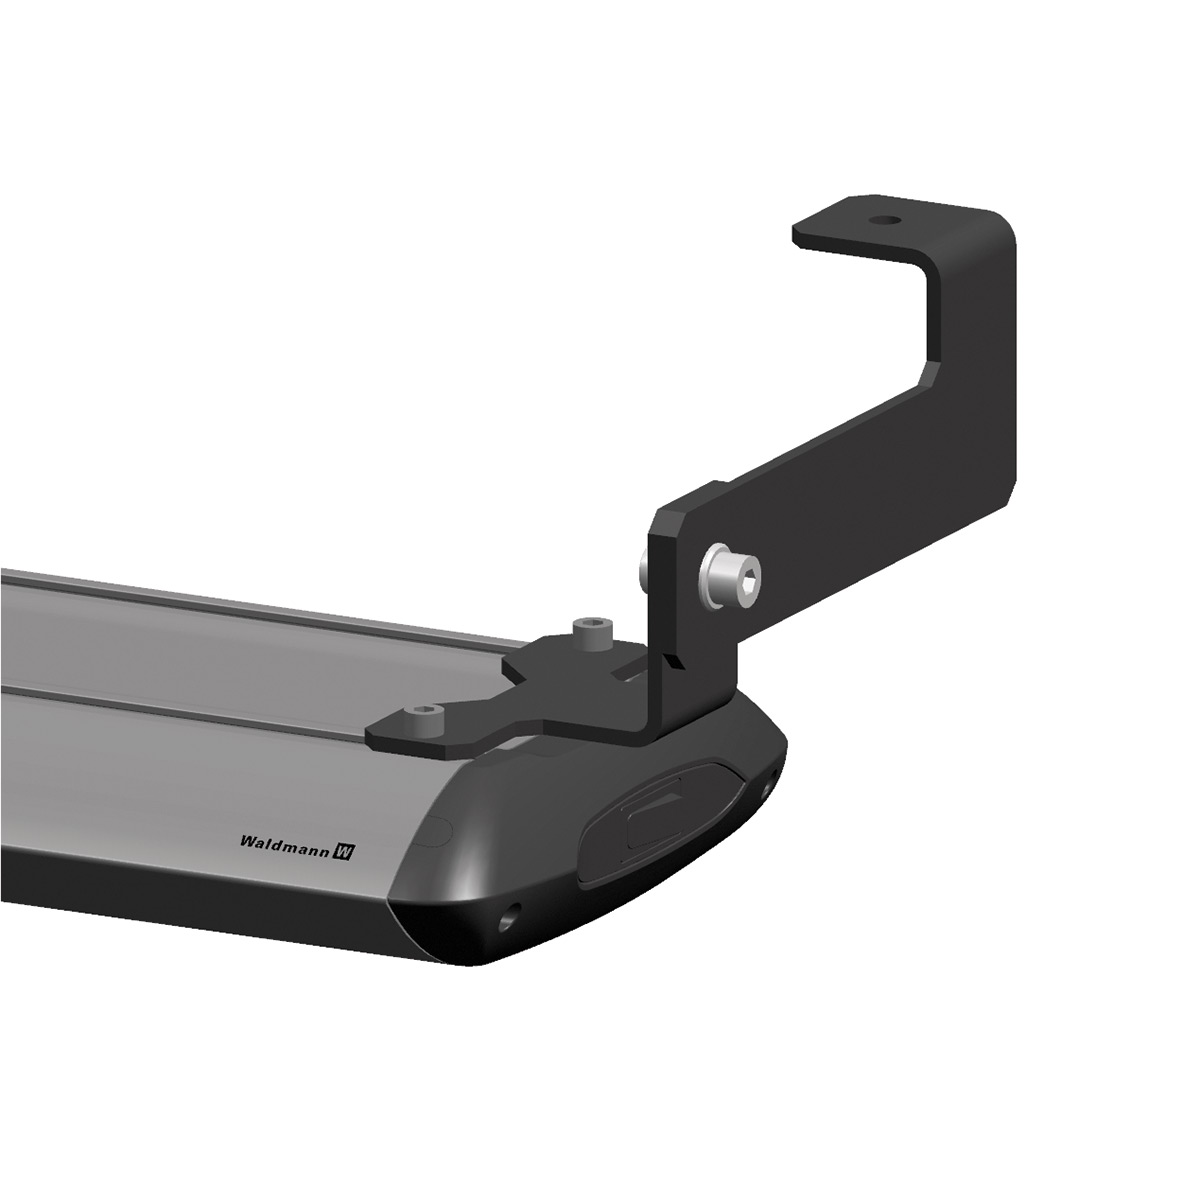 Hospital accessories bracket for top rotating mounting.